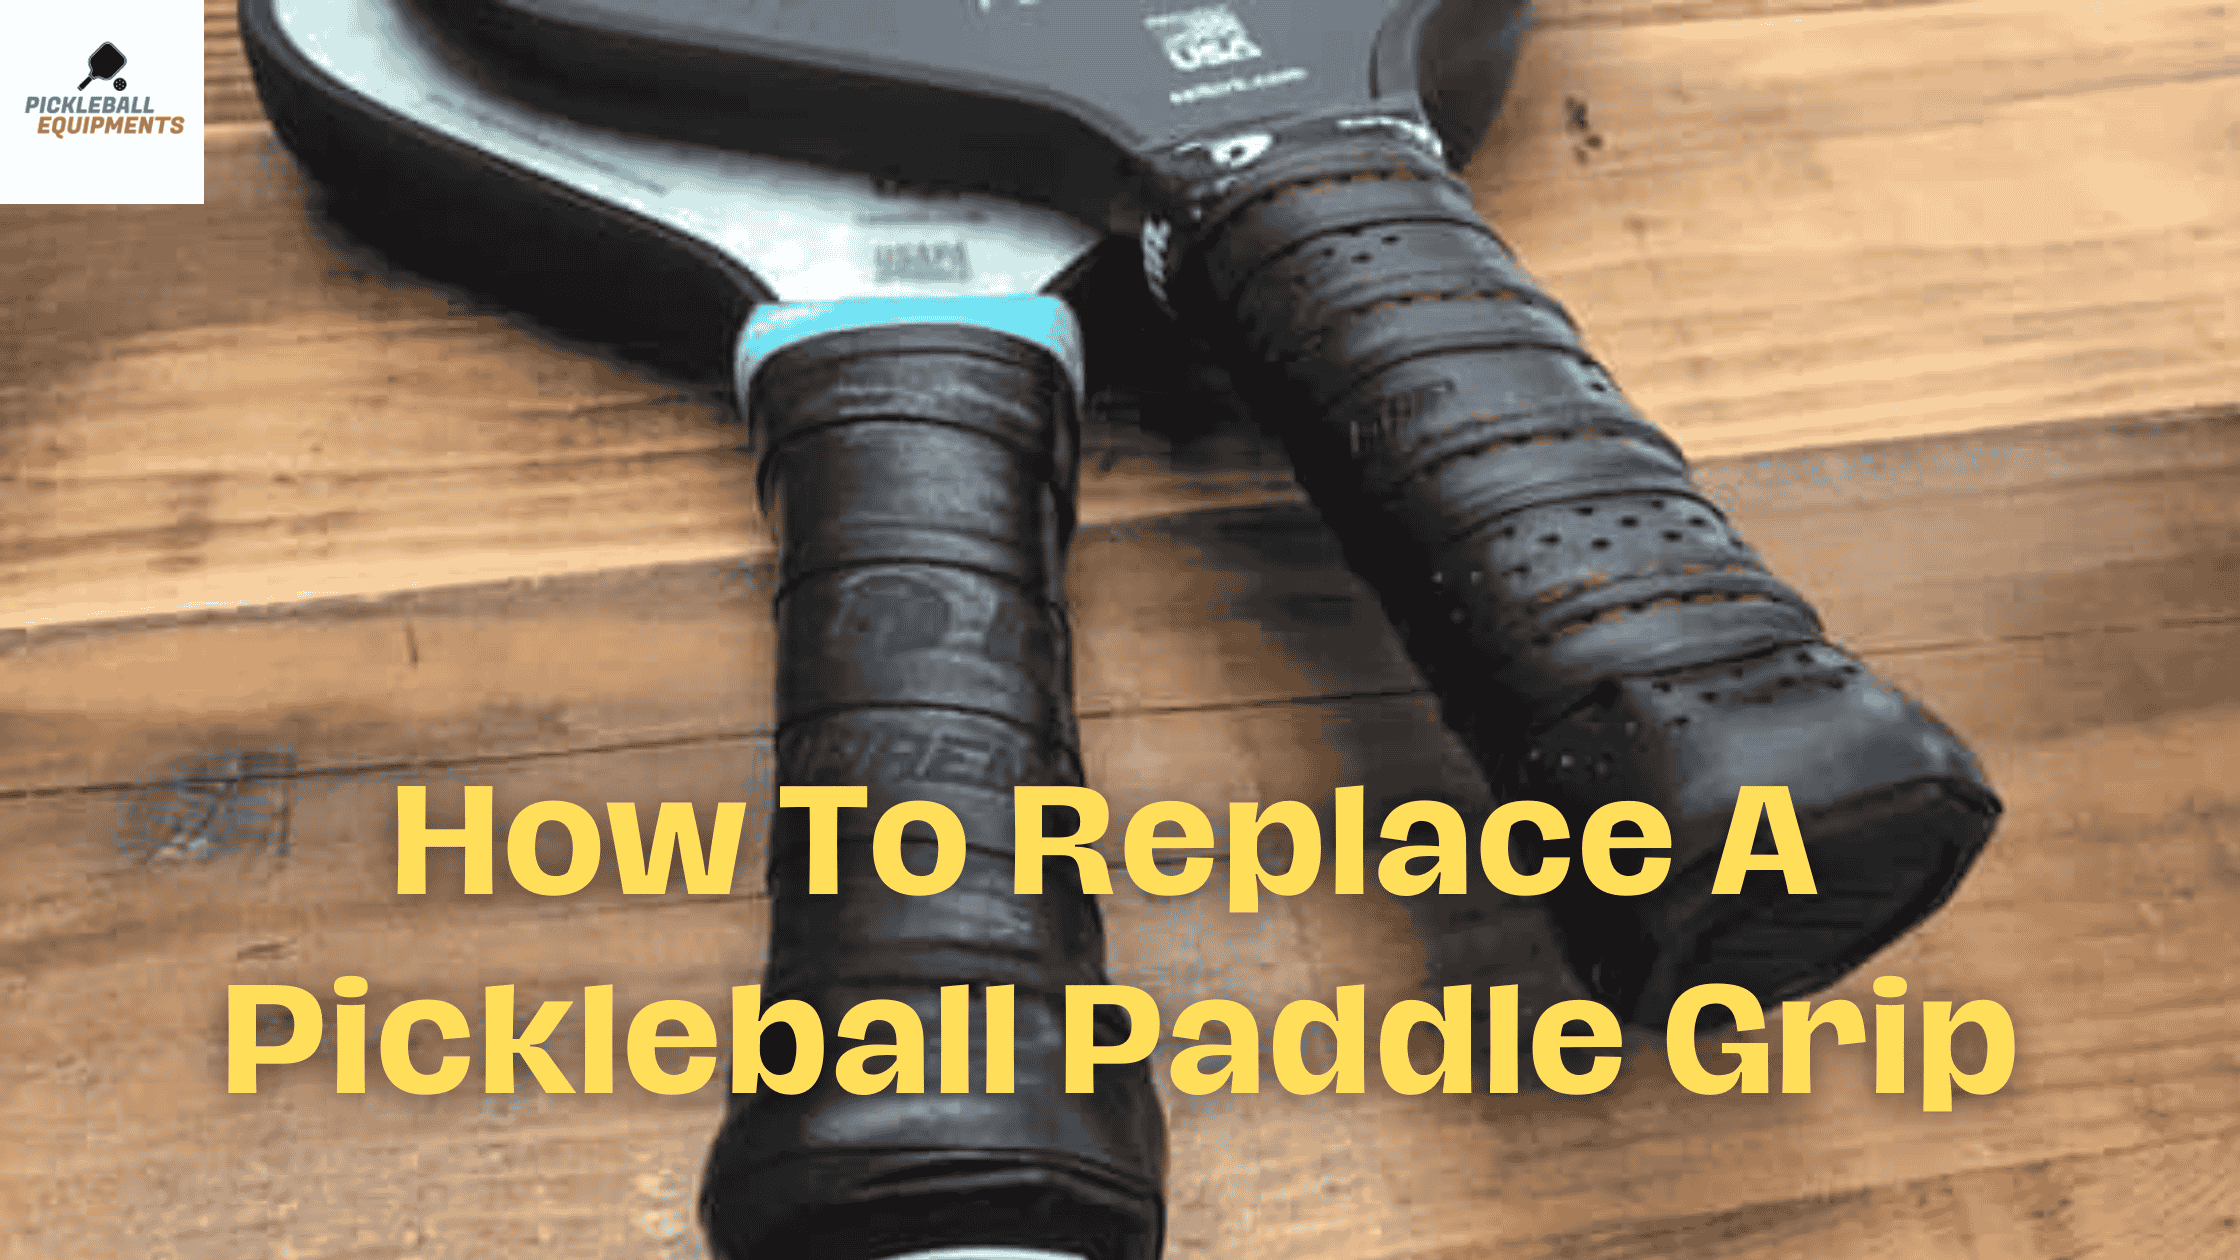 How To Replace A Pickleball Paddle Grip